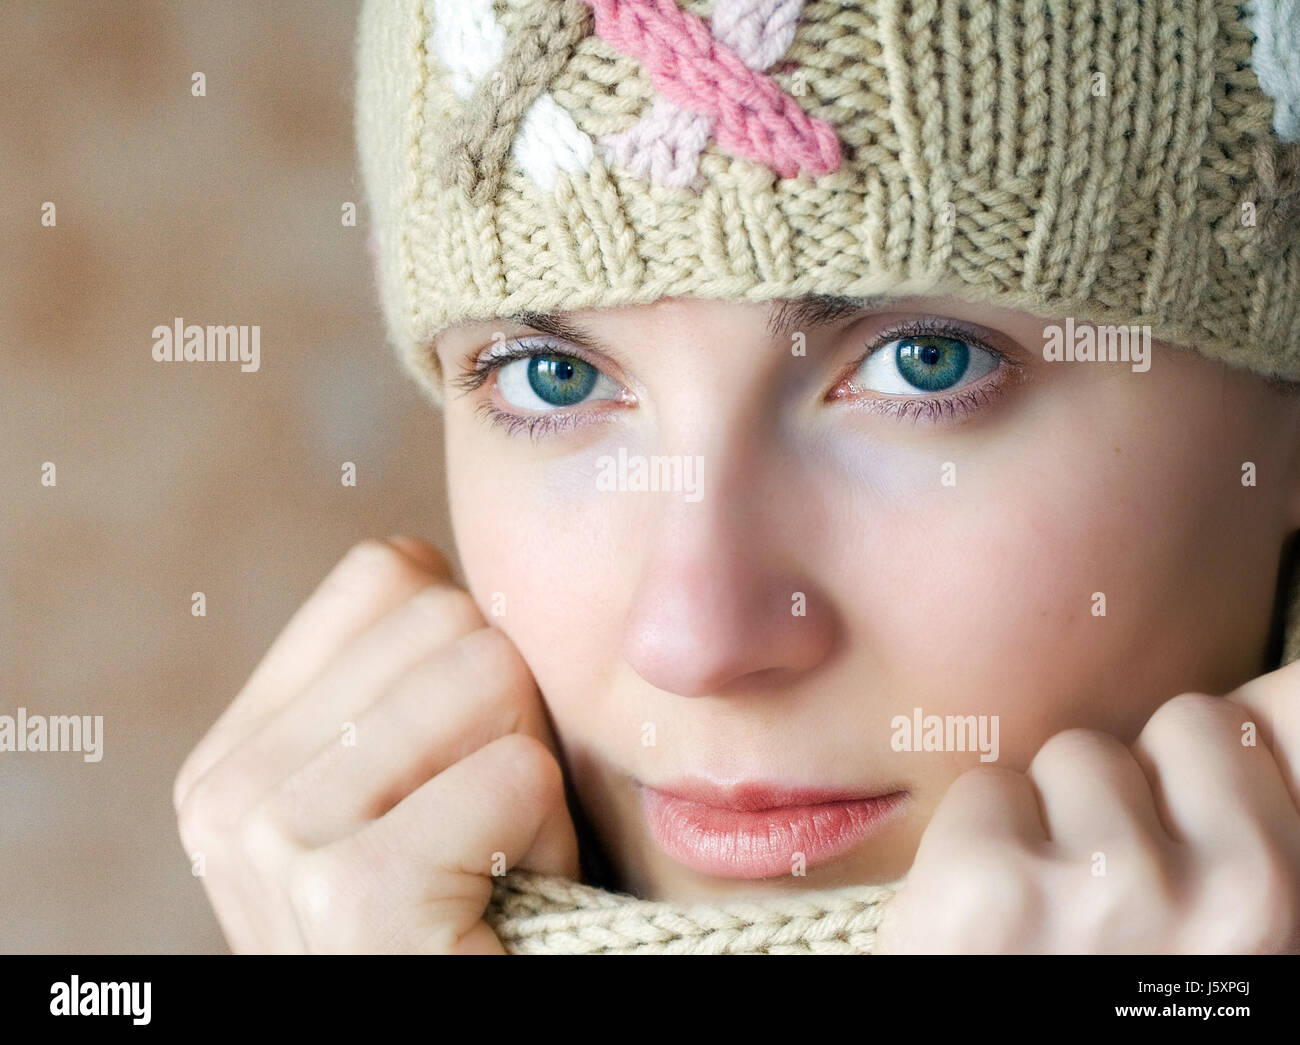 woman winter cold scarf woman winter cold eyes scarf kaelte medchen muetze Stock Photo